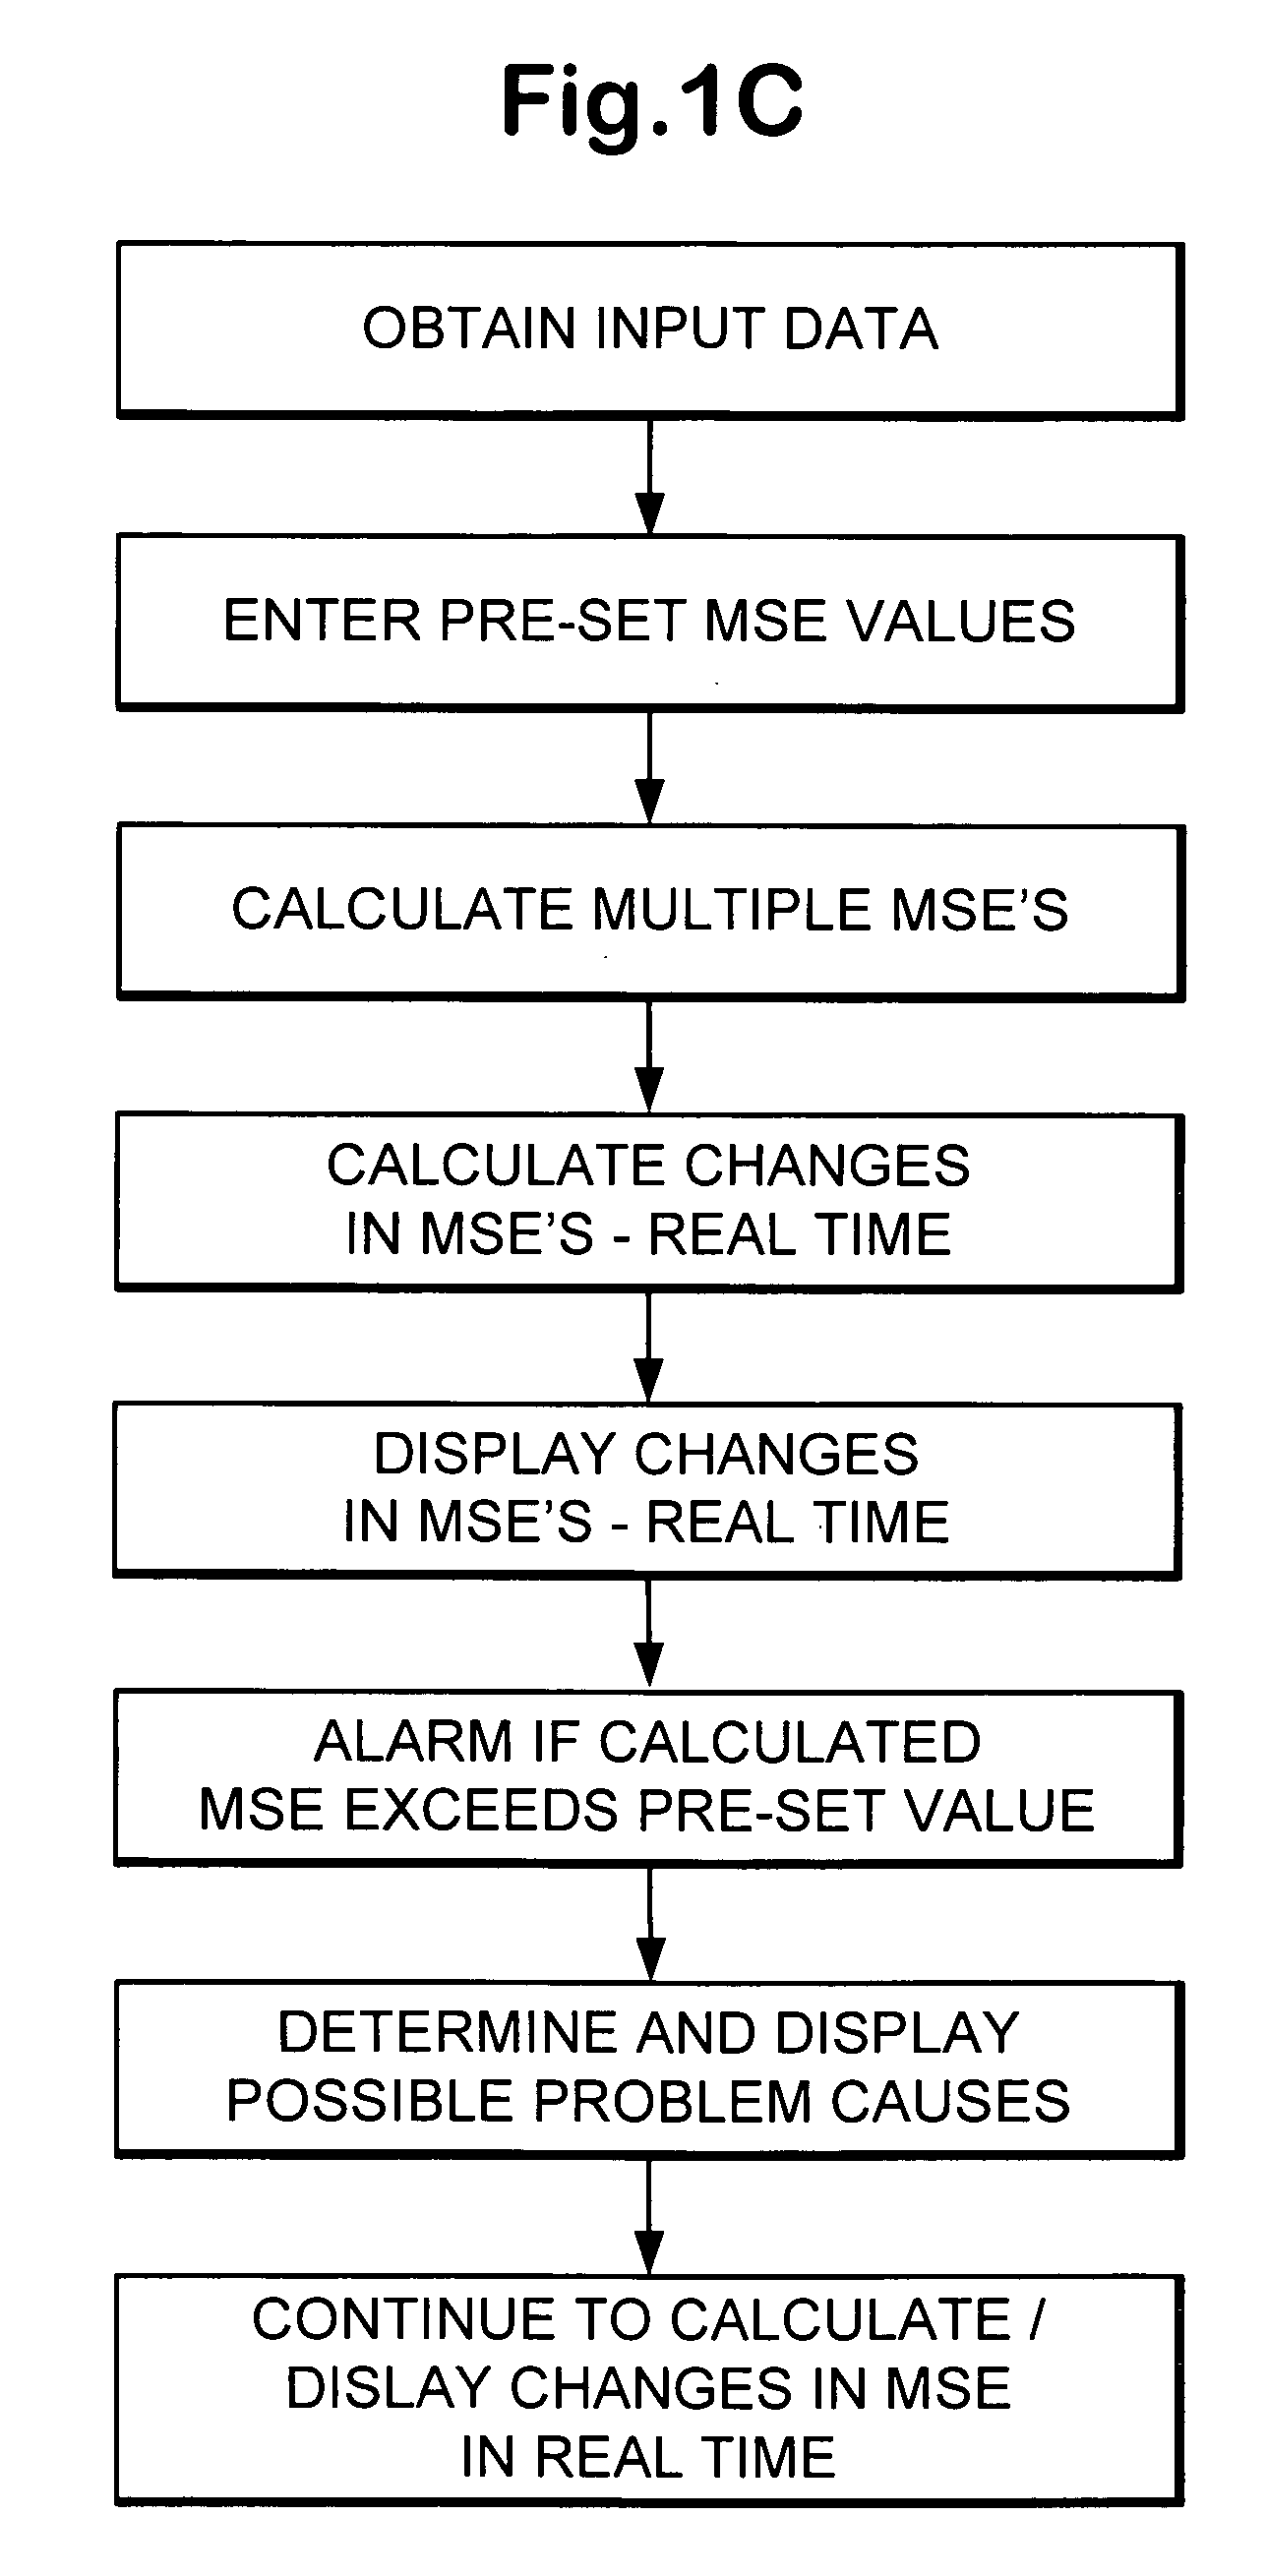 Wellbore operations monitoring & control systems & methods